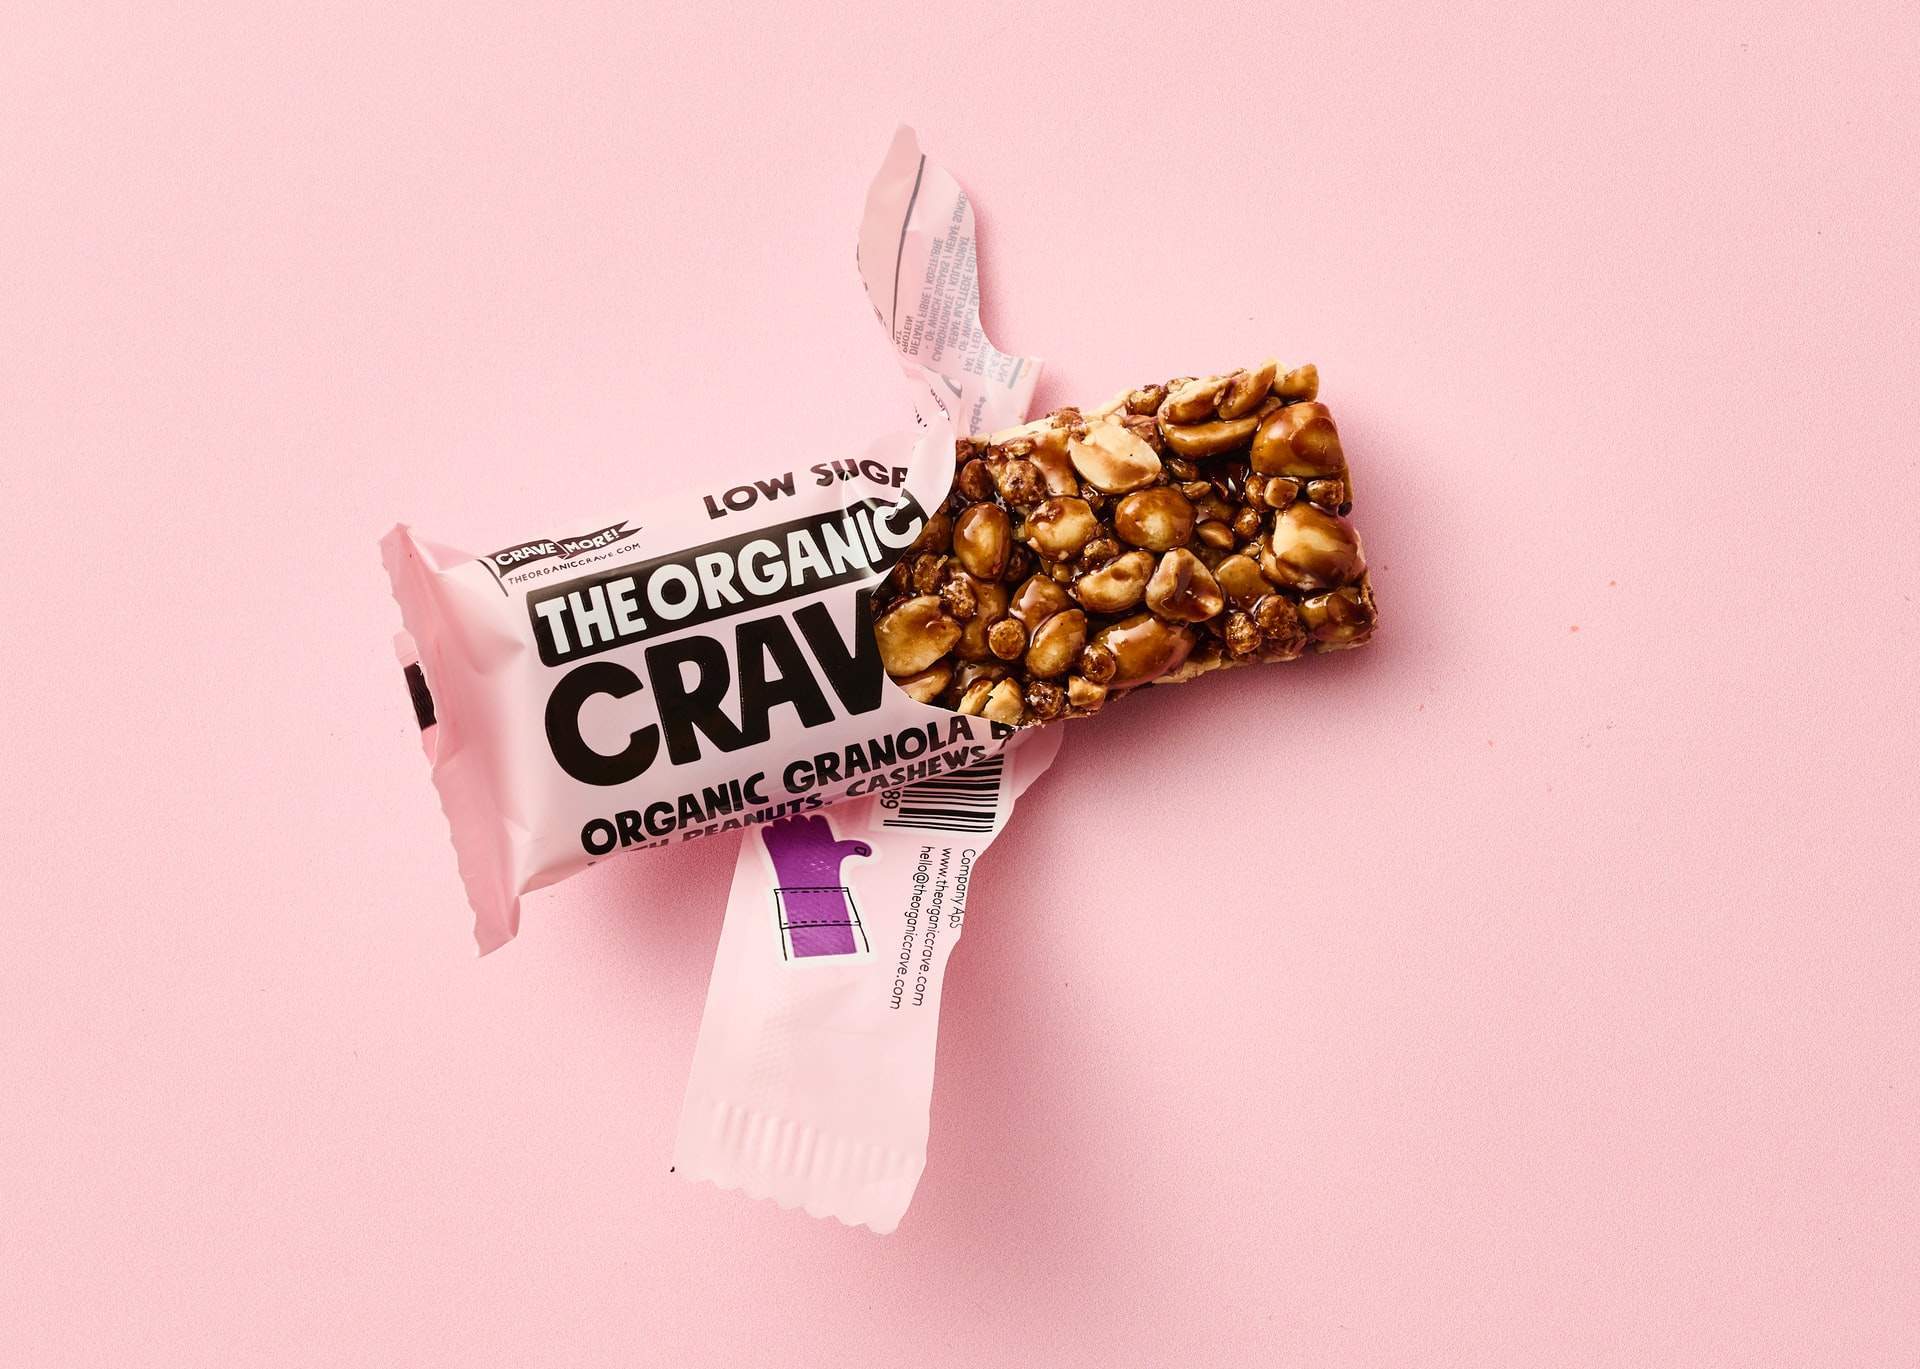 Top 10 Best Healthy And Delicious Protein Bars In 2021